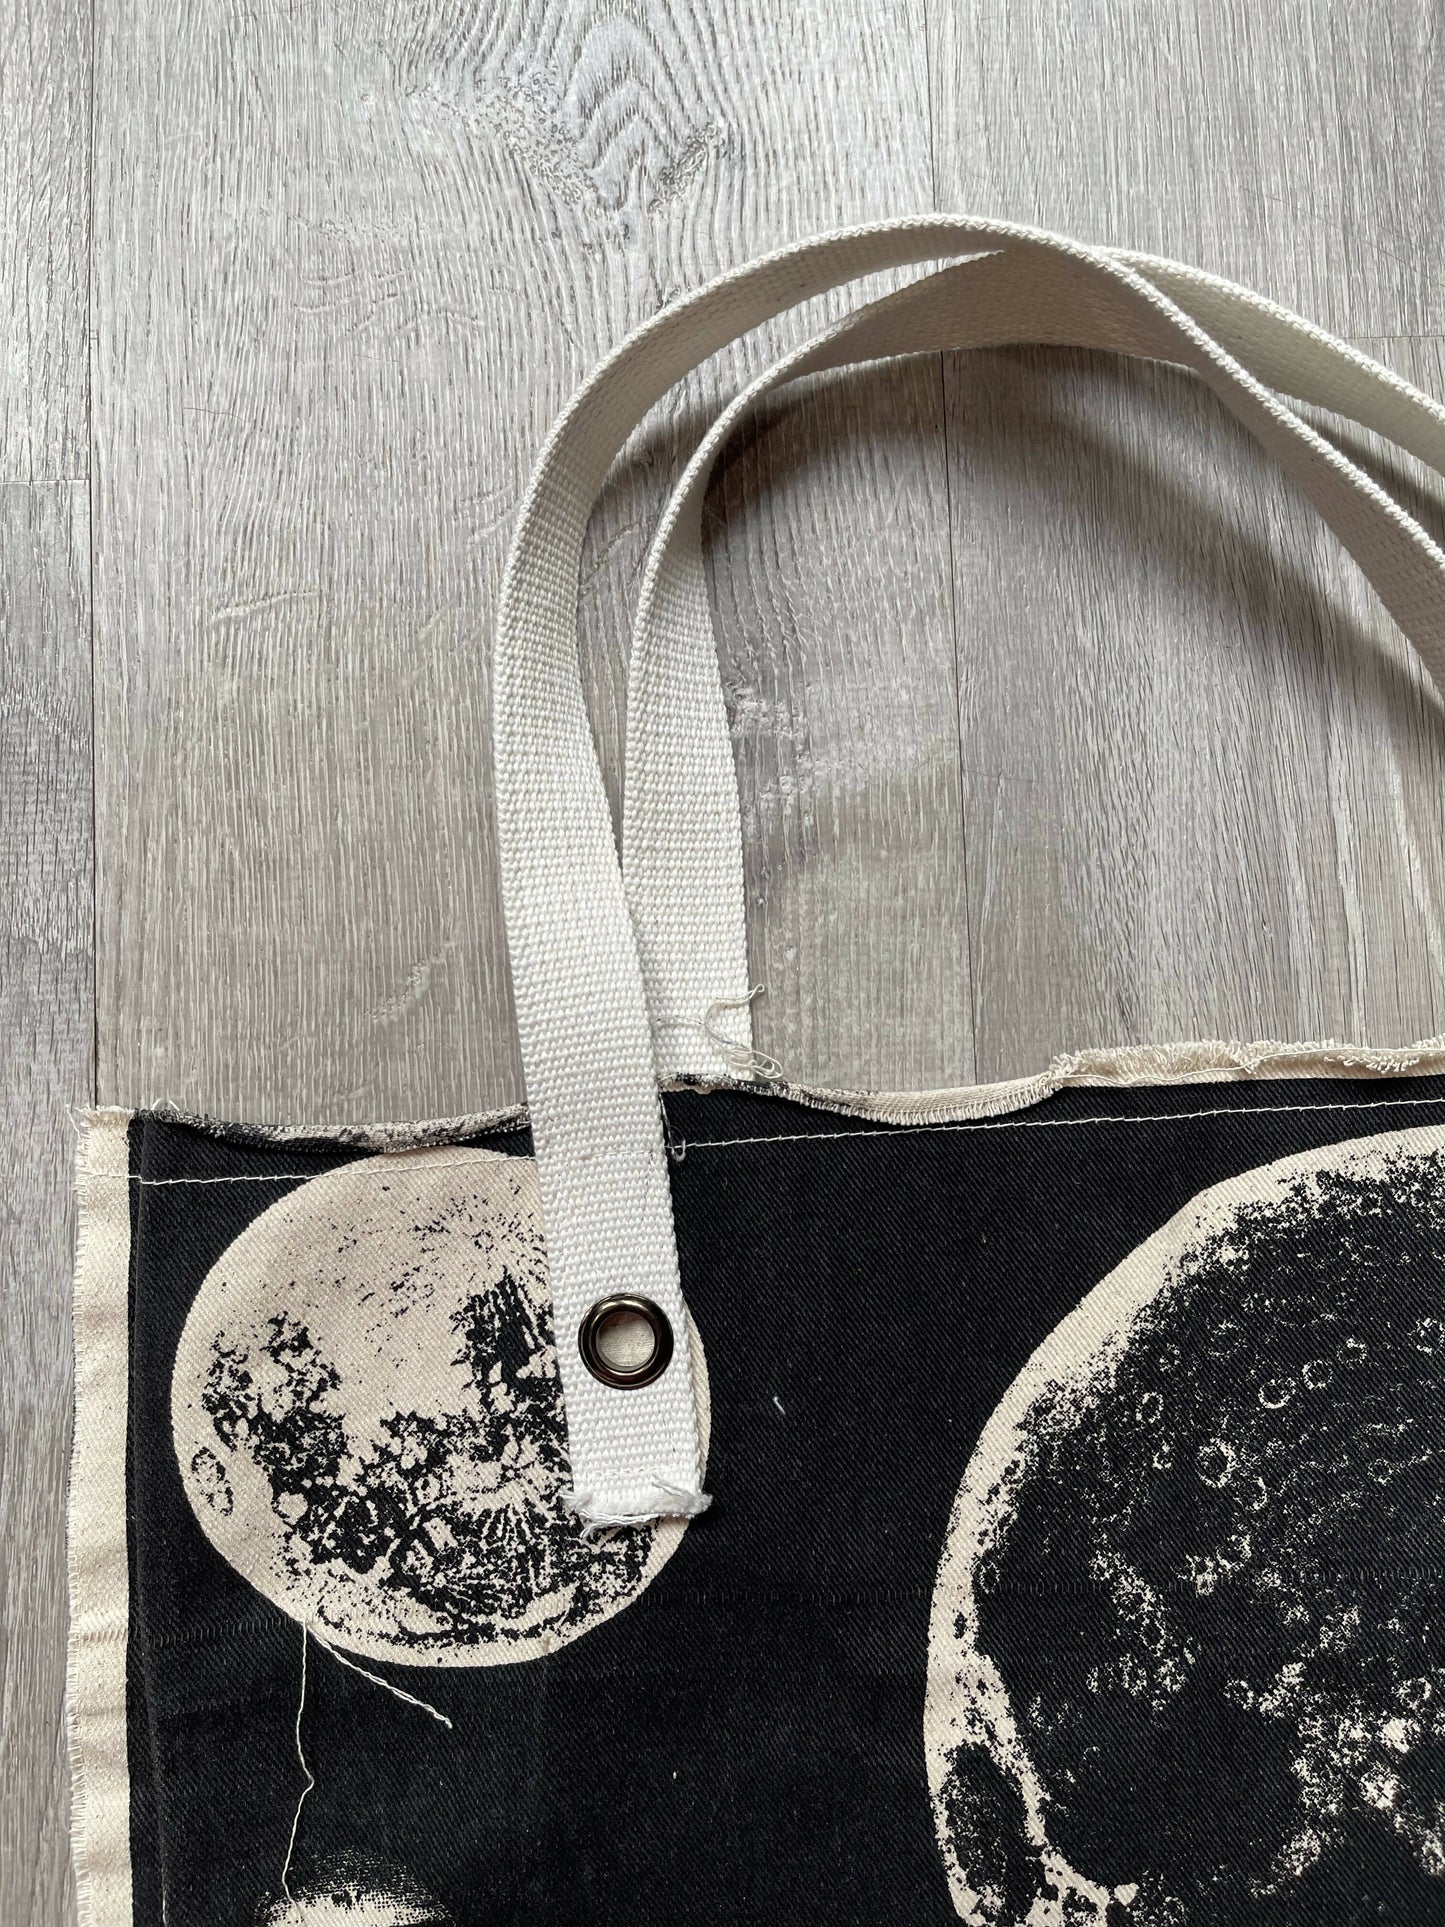 Celestial Chic: Hand-Printed Moon Map Canvas Tote